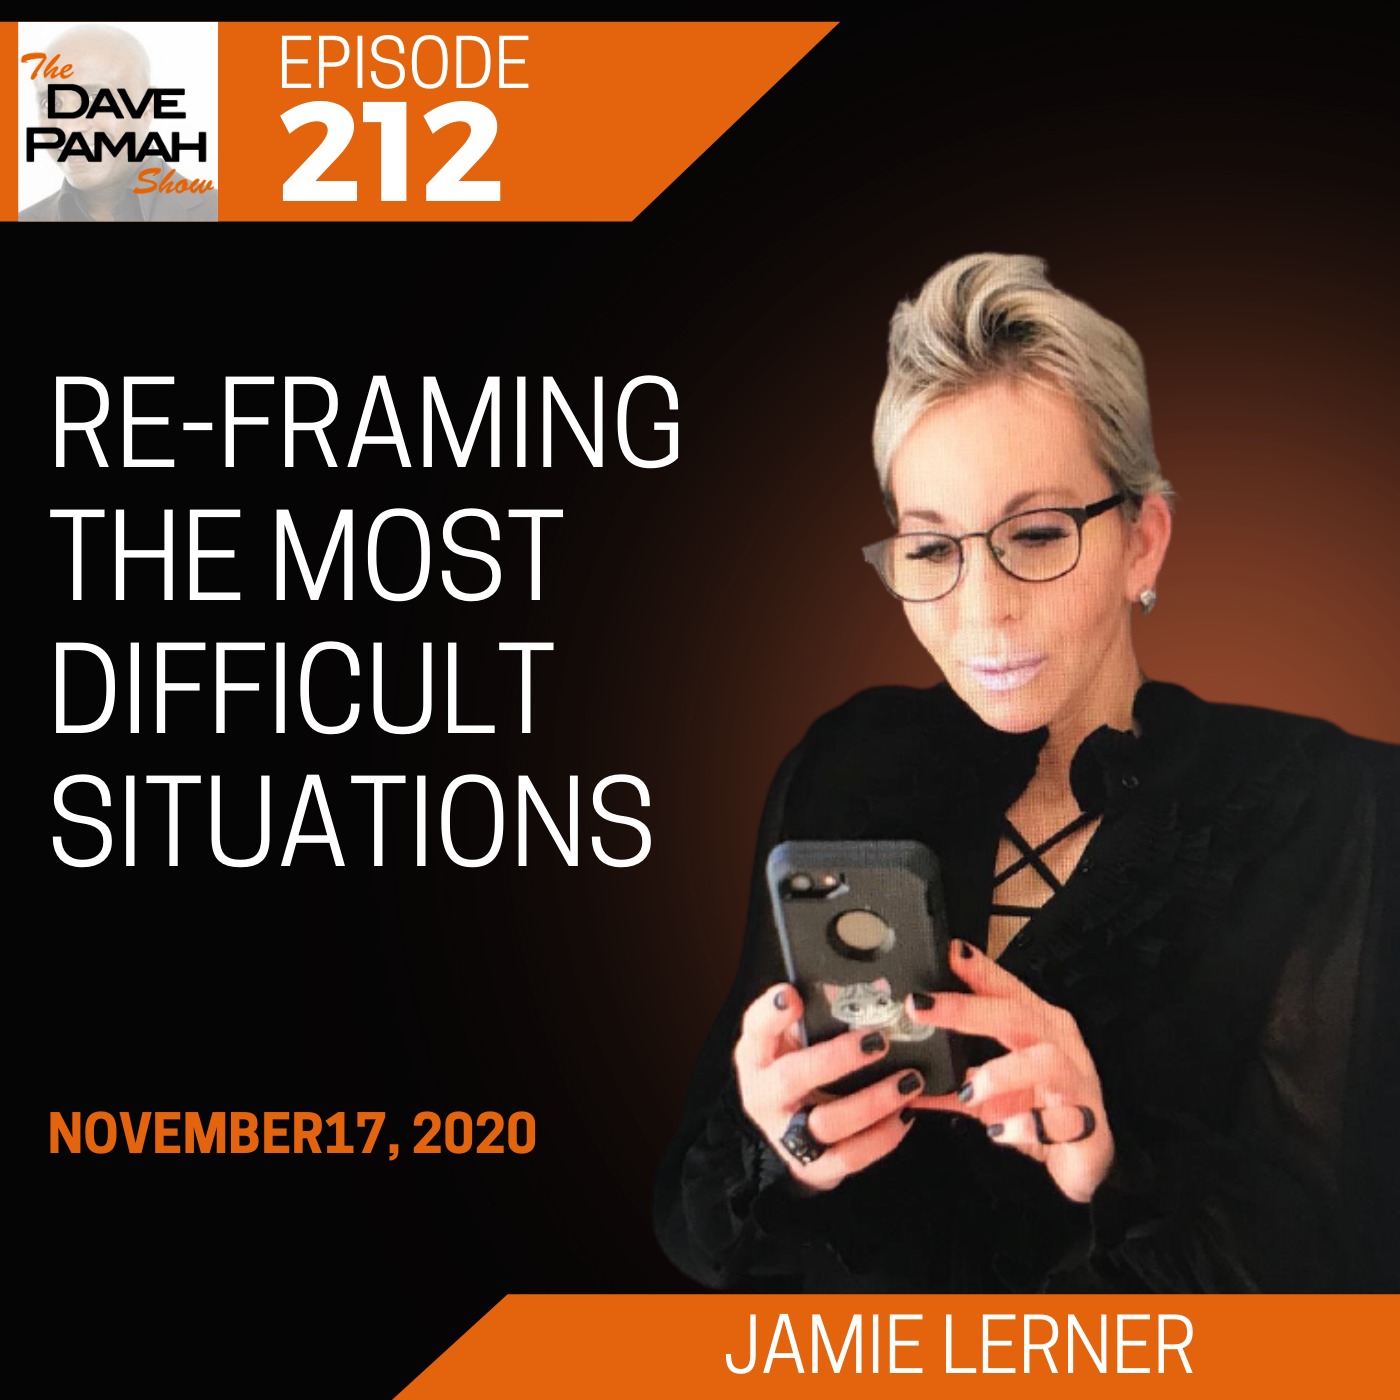 Re-framing the most difficult situations with Jamie Lerner Image